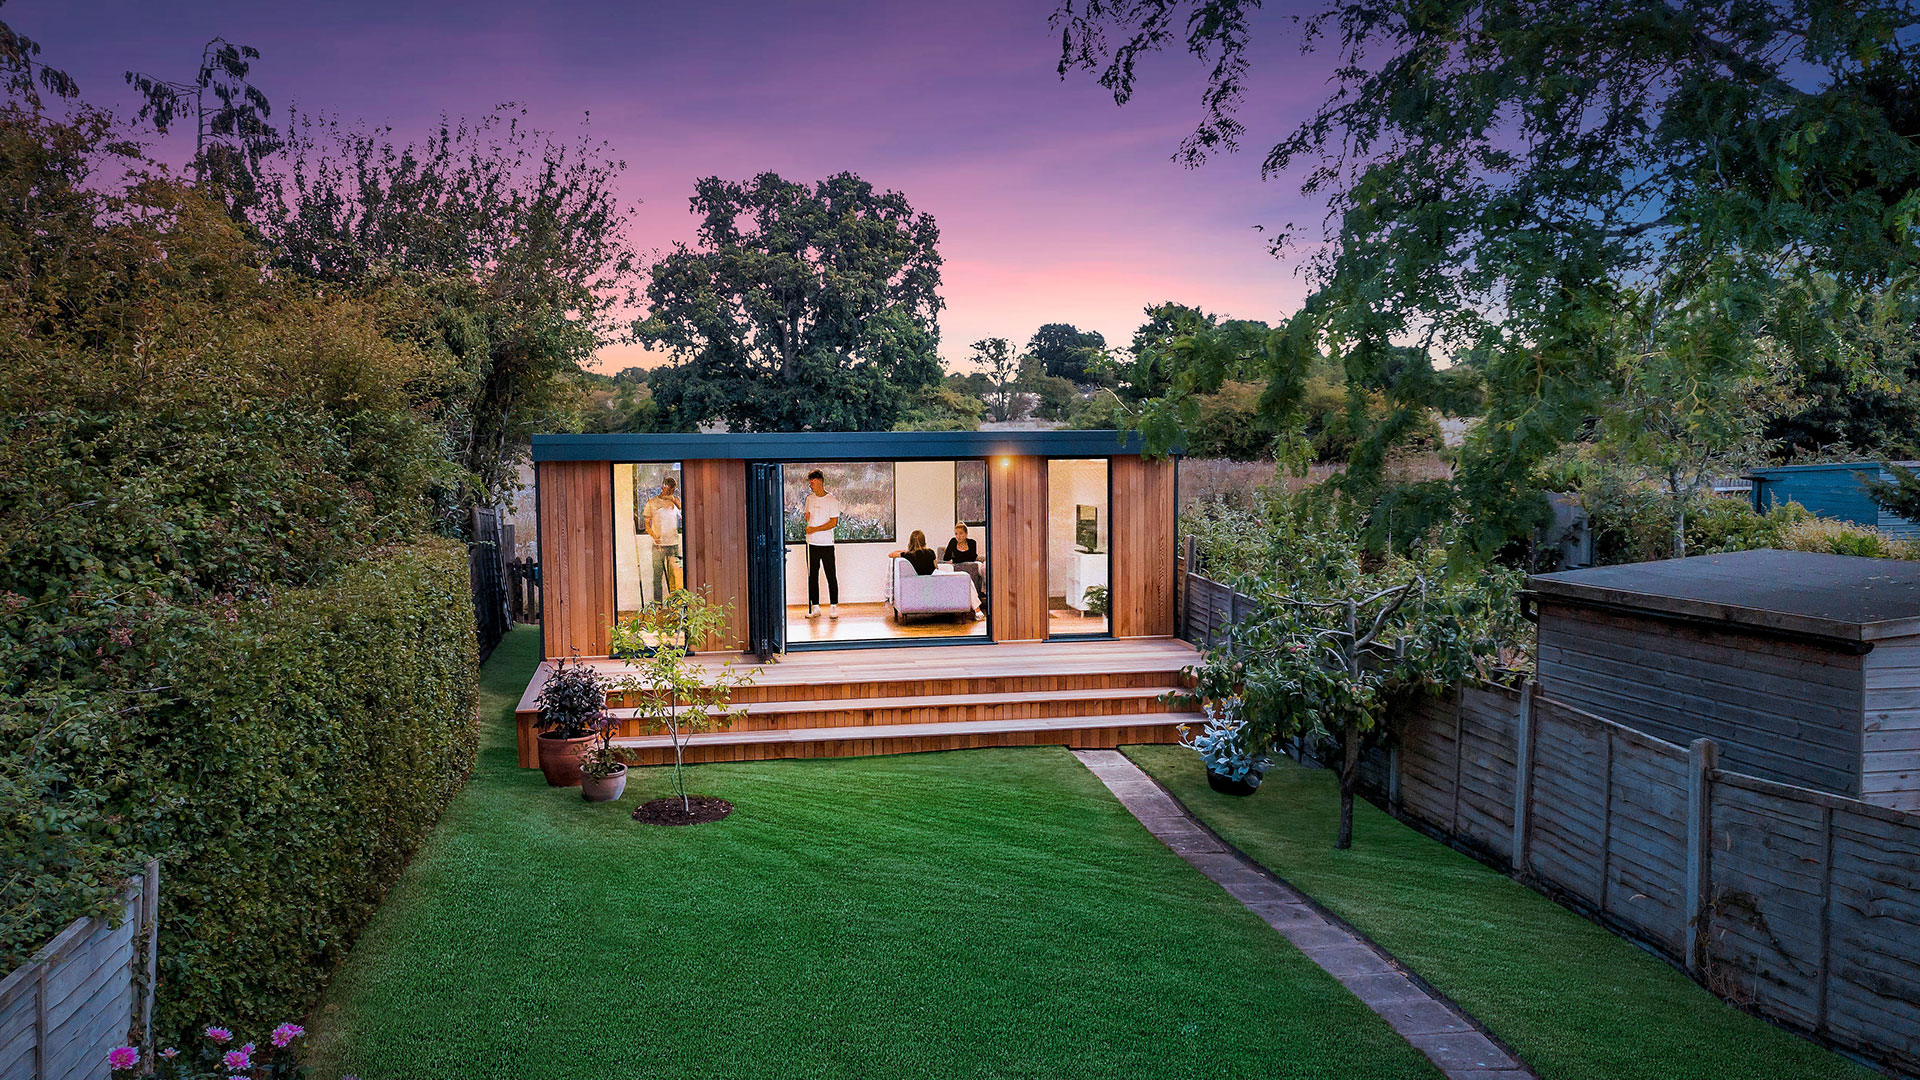 Top 10 smart home devices for your garden office